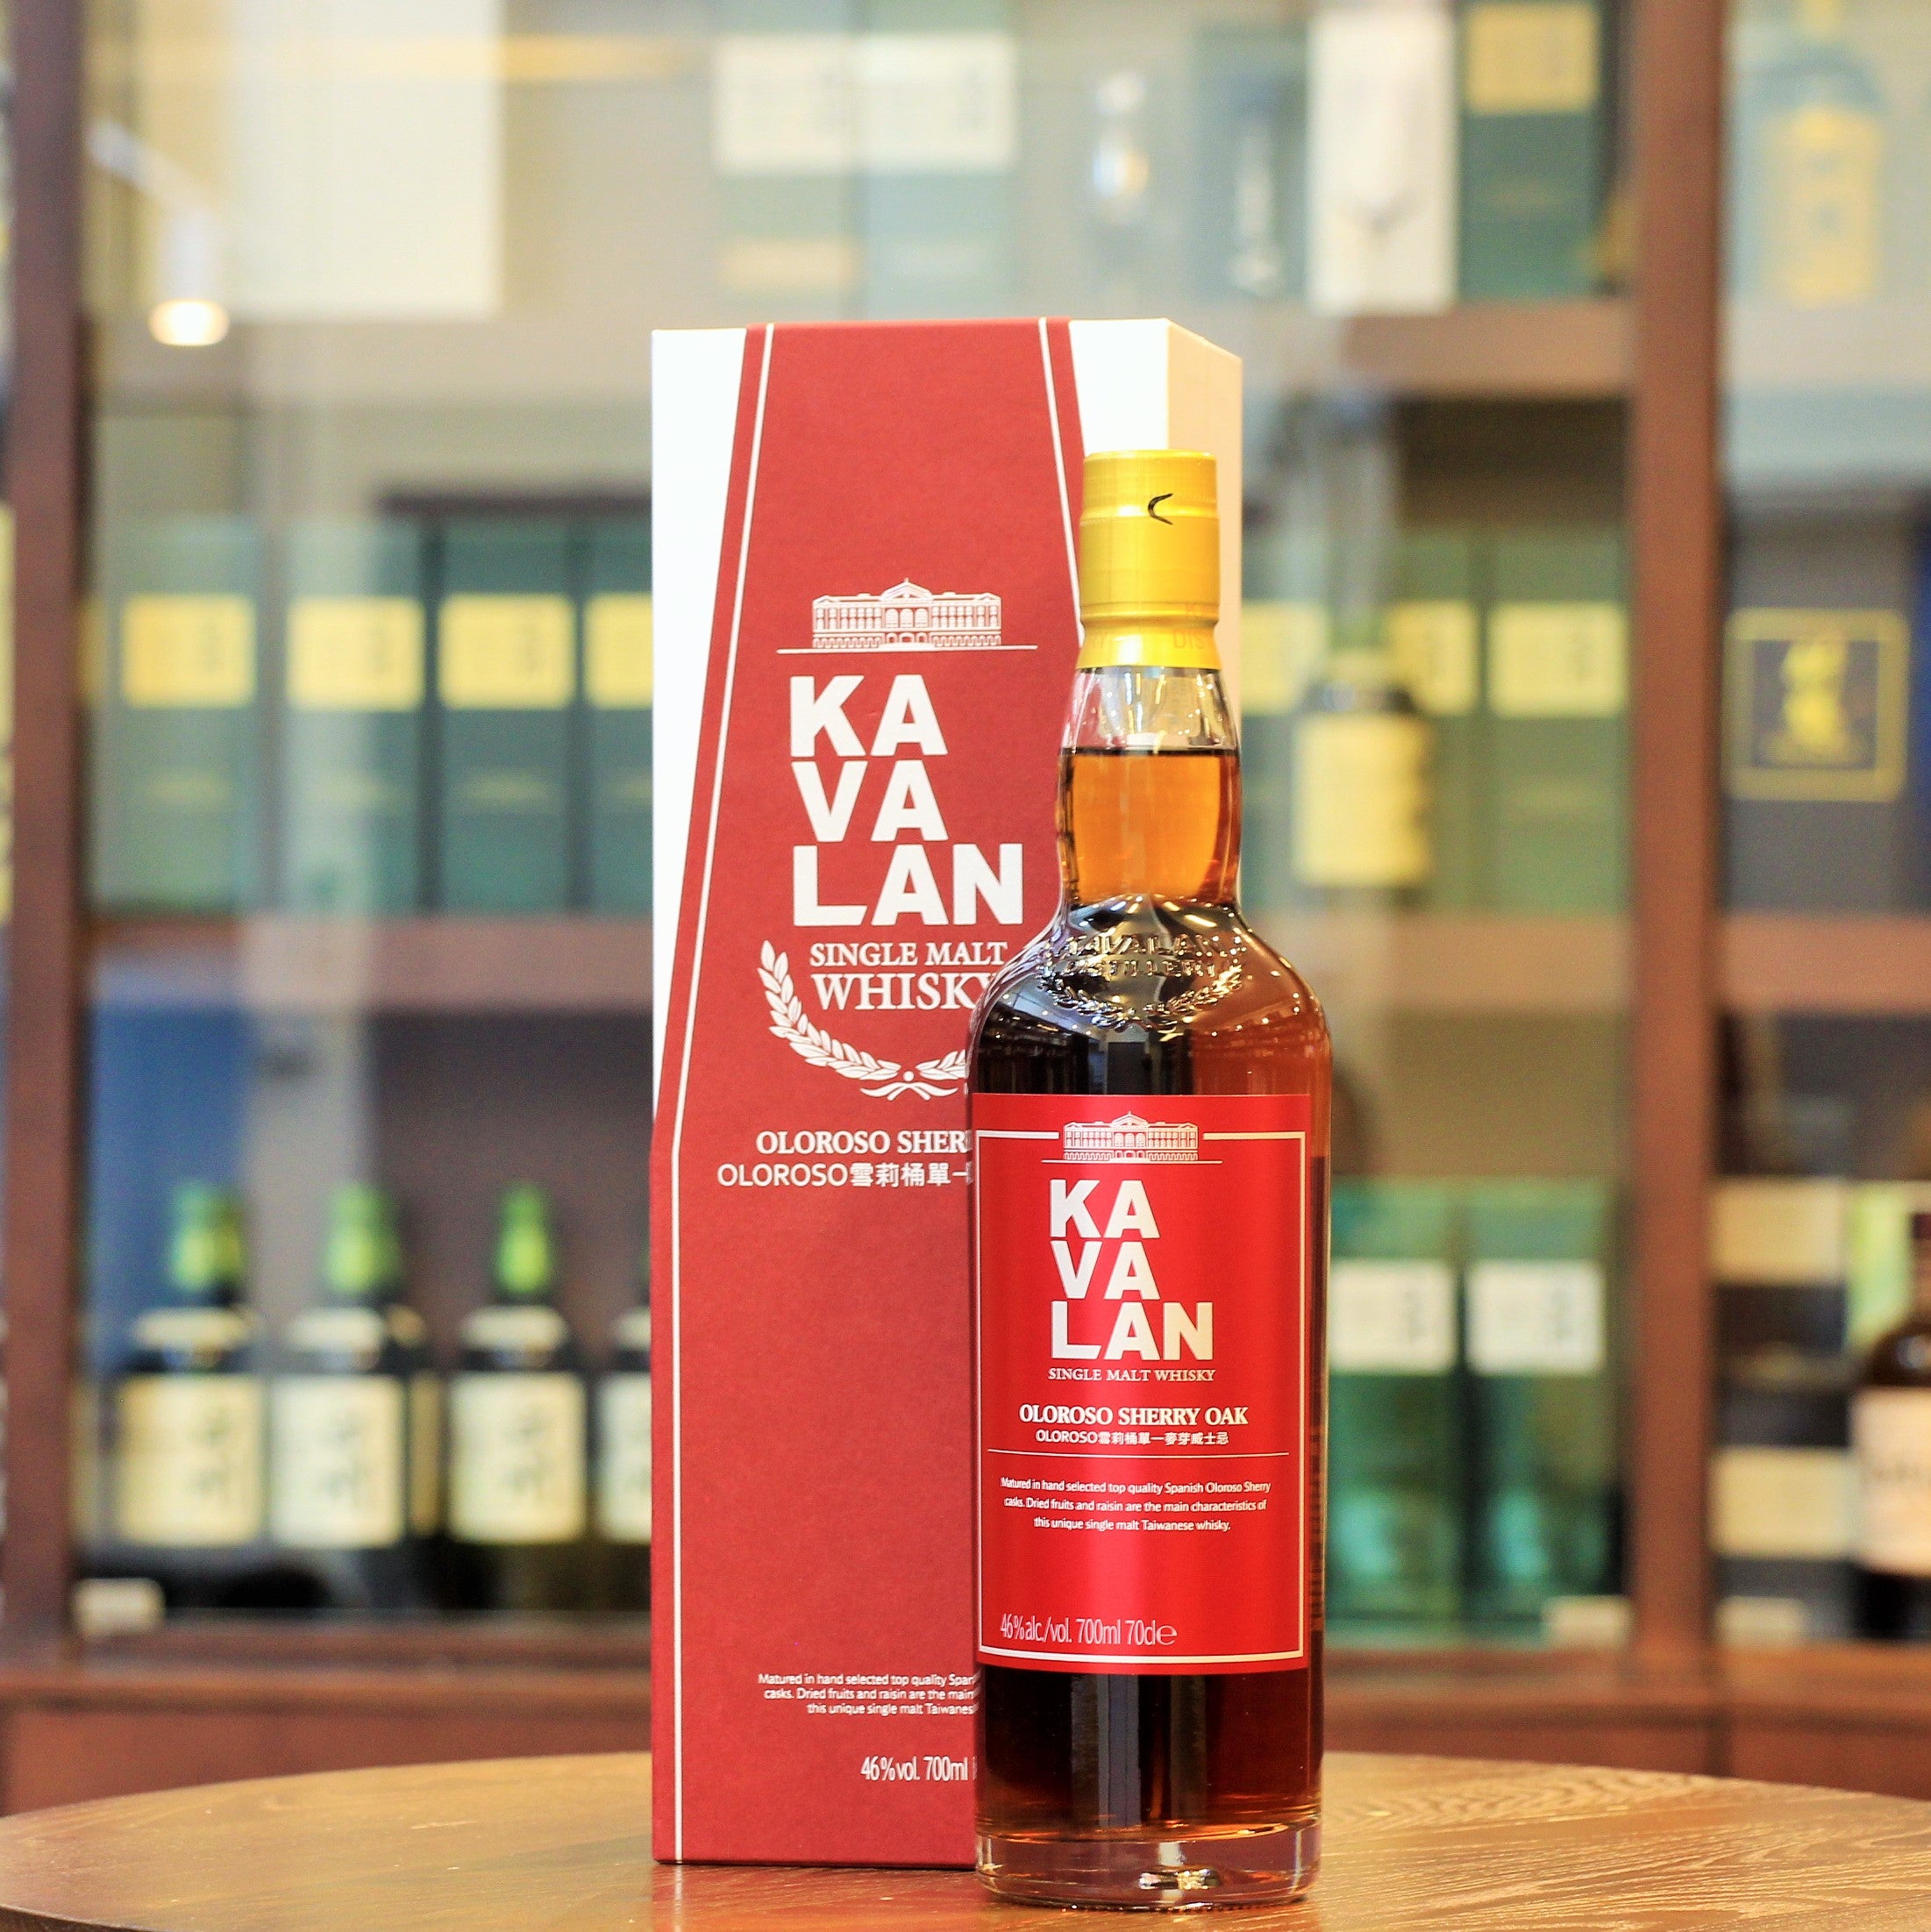 Originally launched in 2016 as a regular release within the Kavalan range, the Sherry Oak release uses the same Oloroso sherry casks used to mature the Solist Sherry expressions except that this has been bottled at 46% strength. Essentially a 46% version of the Kavalan Solist Oloroso Sherry release to be enjoyed straight up/neat. Dried fruits, nuts and raisins are the mainstay of this release. 